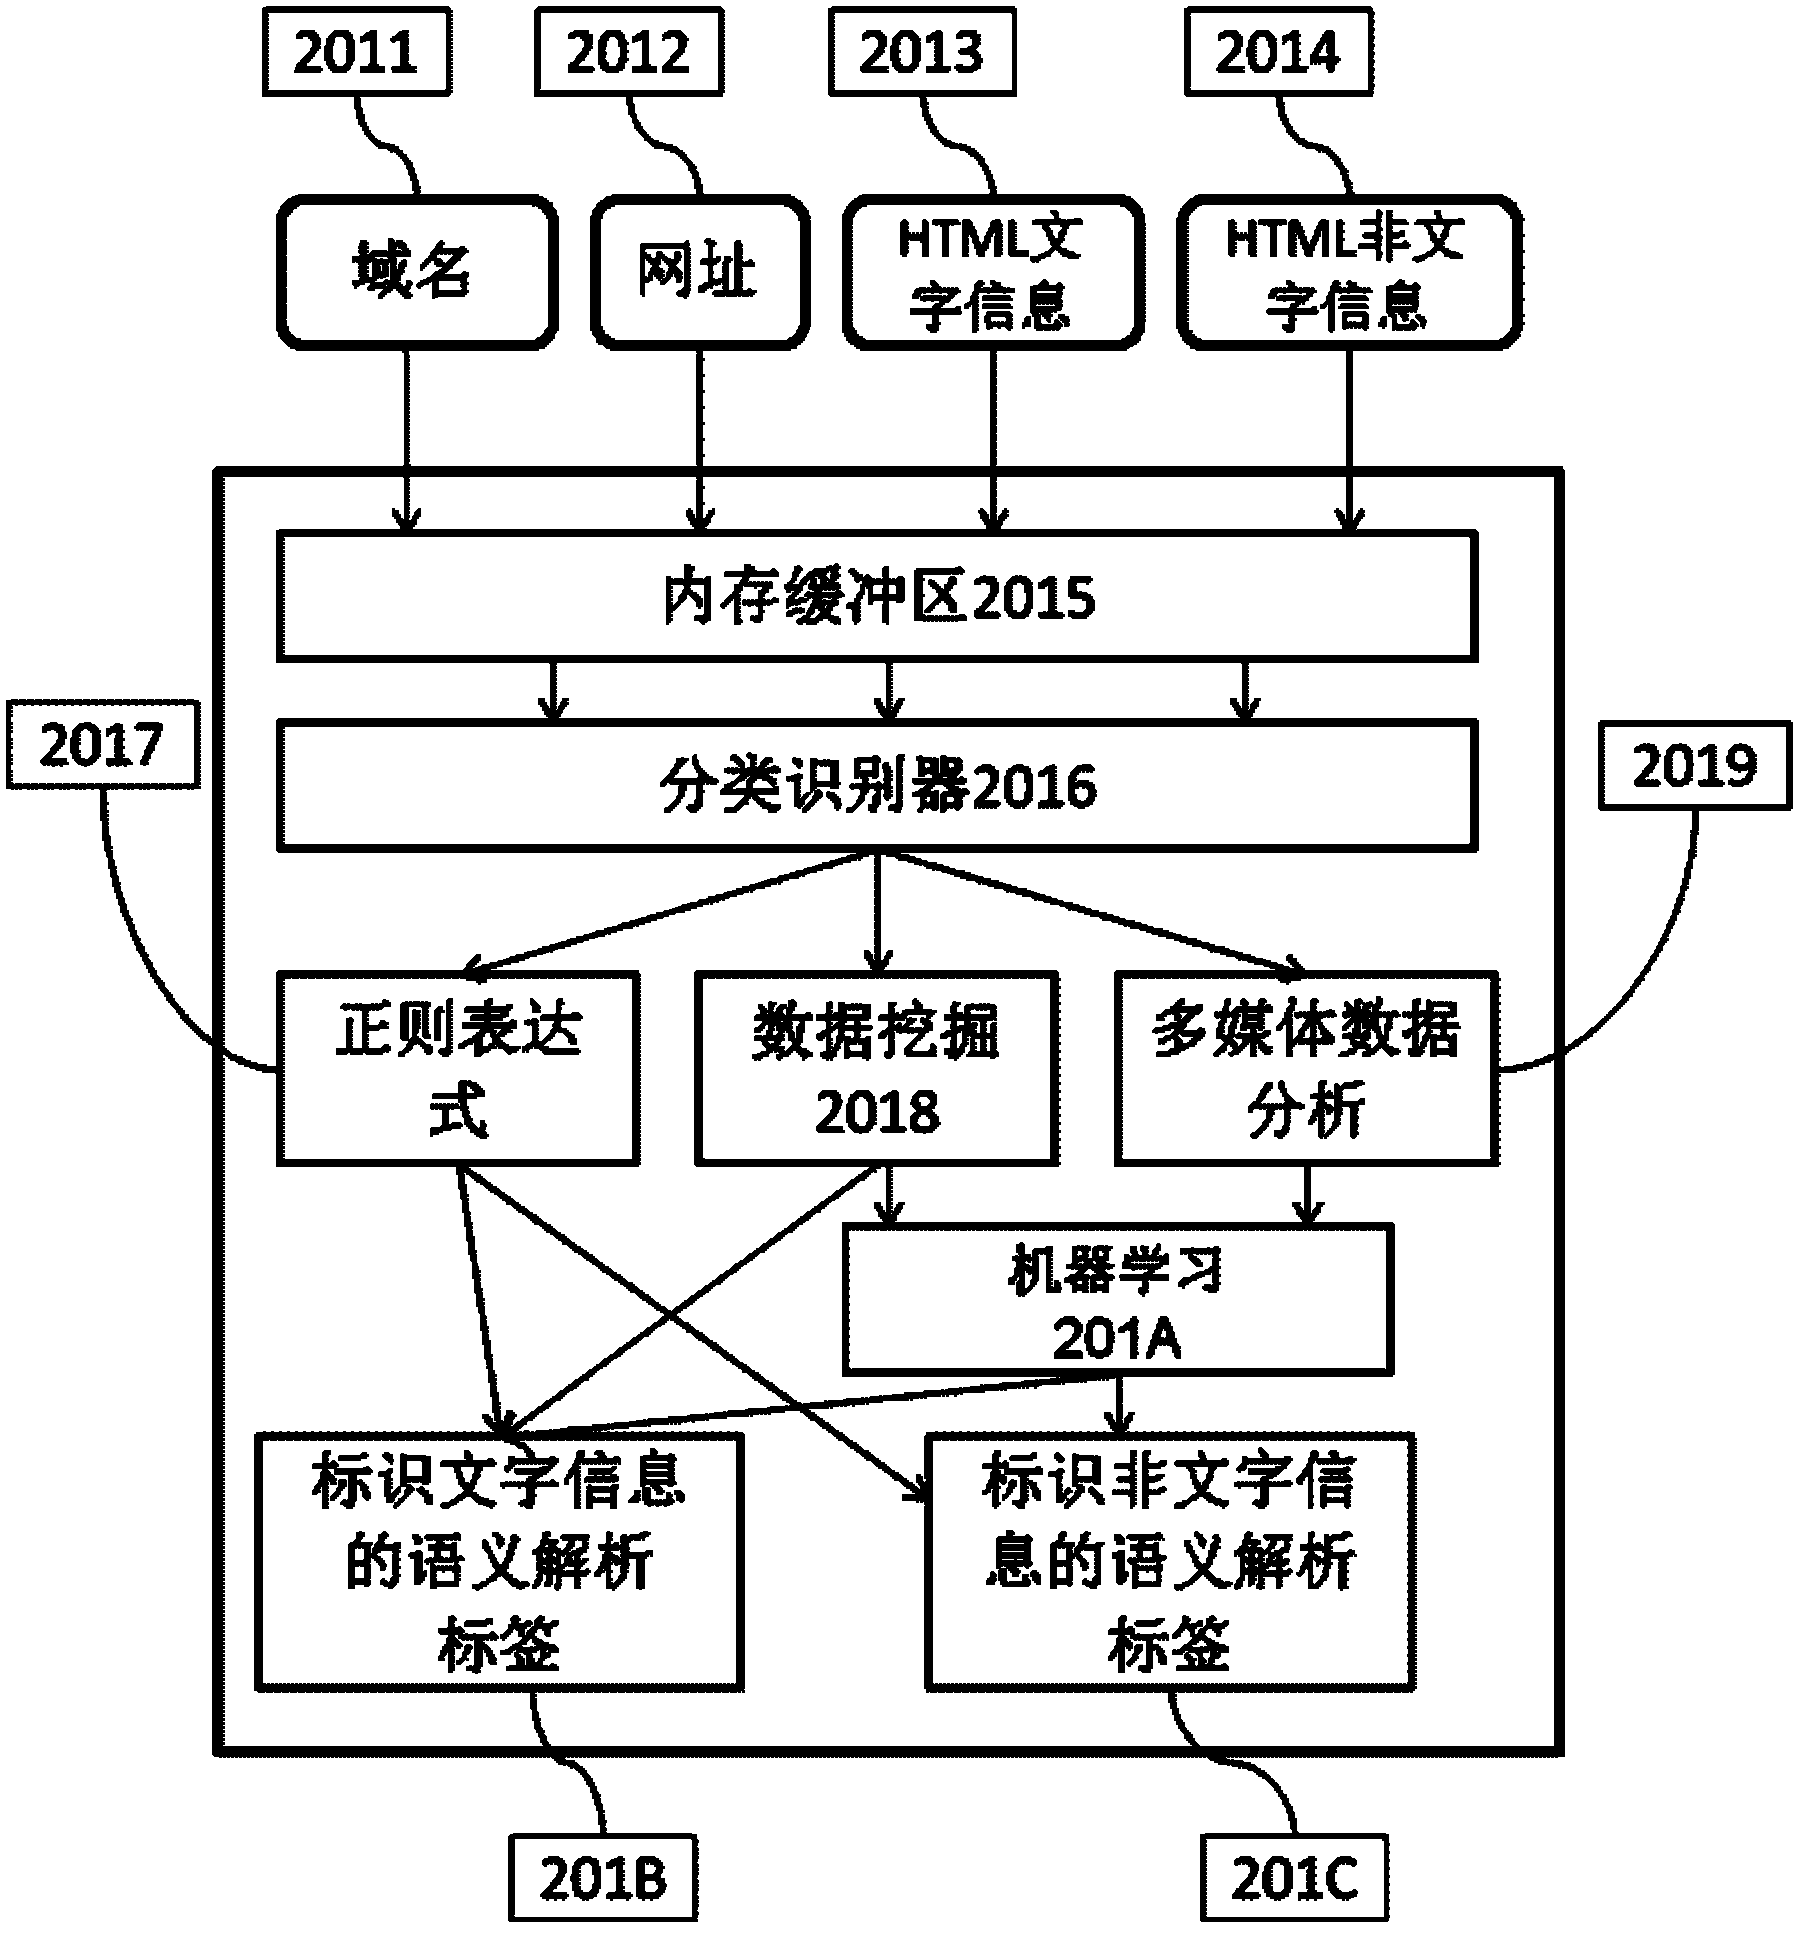 Method and search system for finding, integrating and providing review information based on semantics